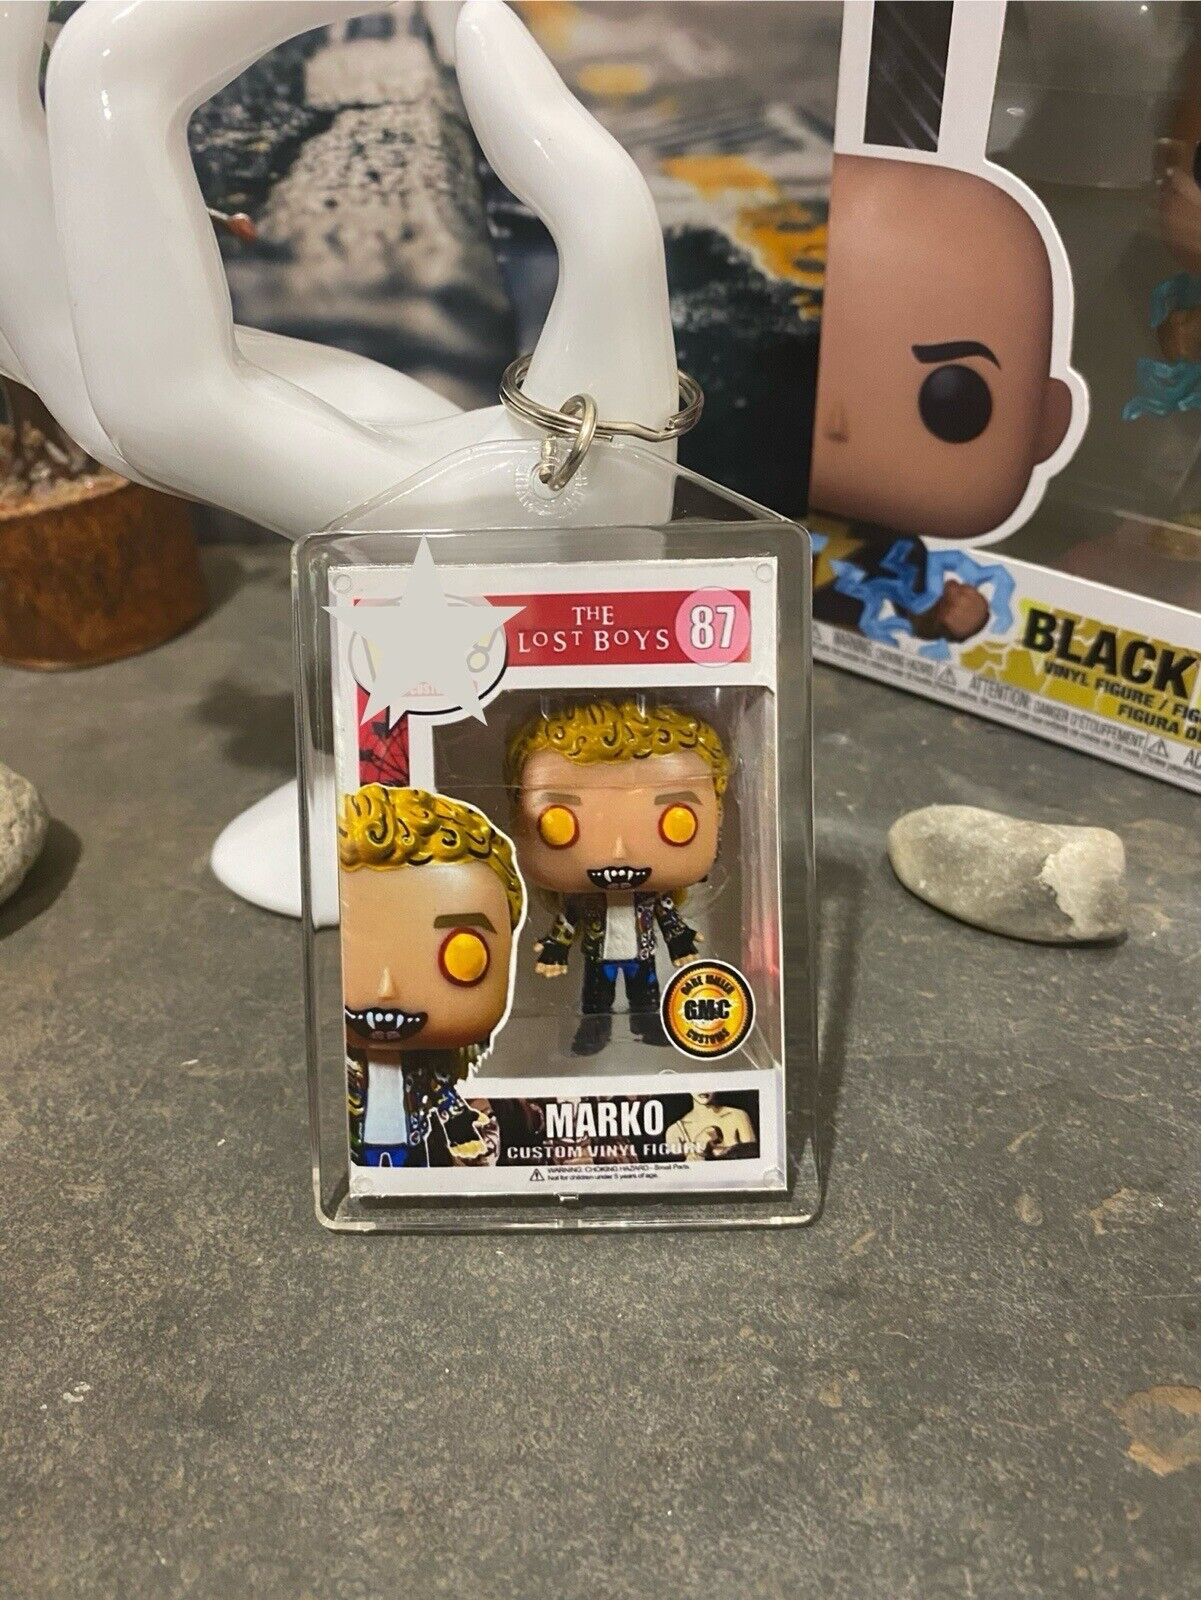 Marko The Lost Boys - Action Figure - FANMADE Keychain - Gift IDEA For Movie Fan